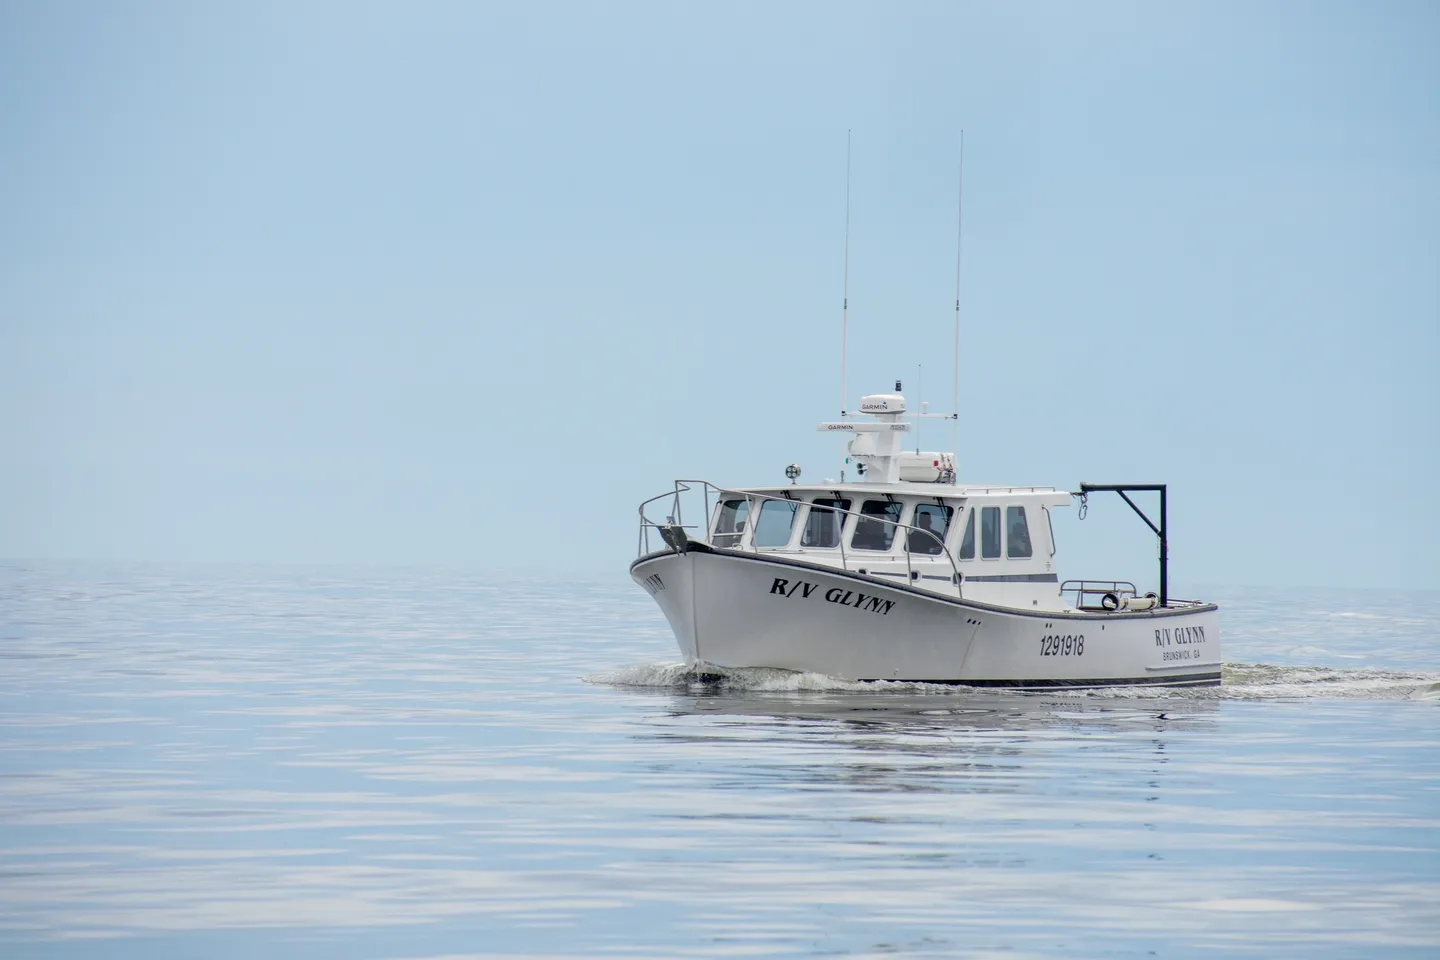 The R/V Glynn. The Coastal Resources Division of the Georgia Department of Natural Resources.